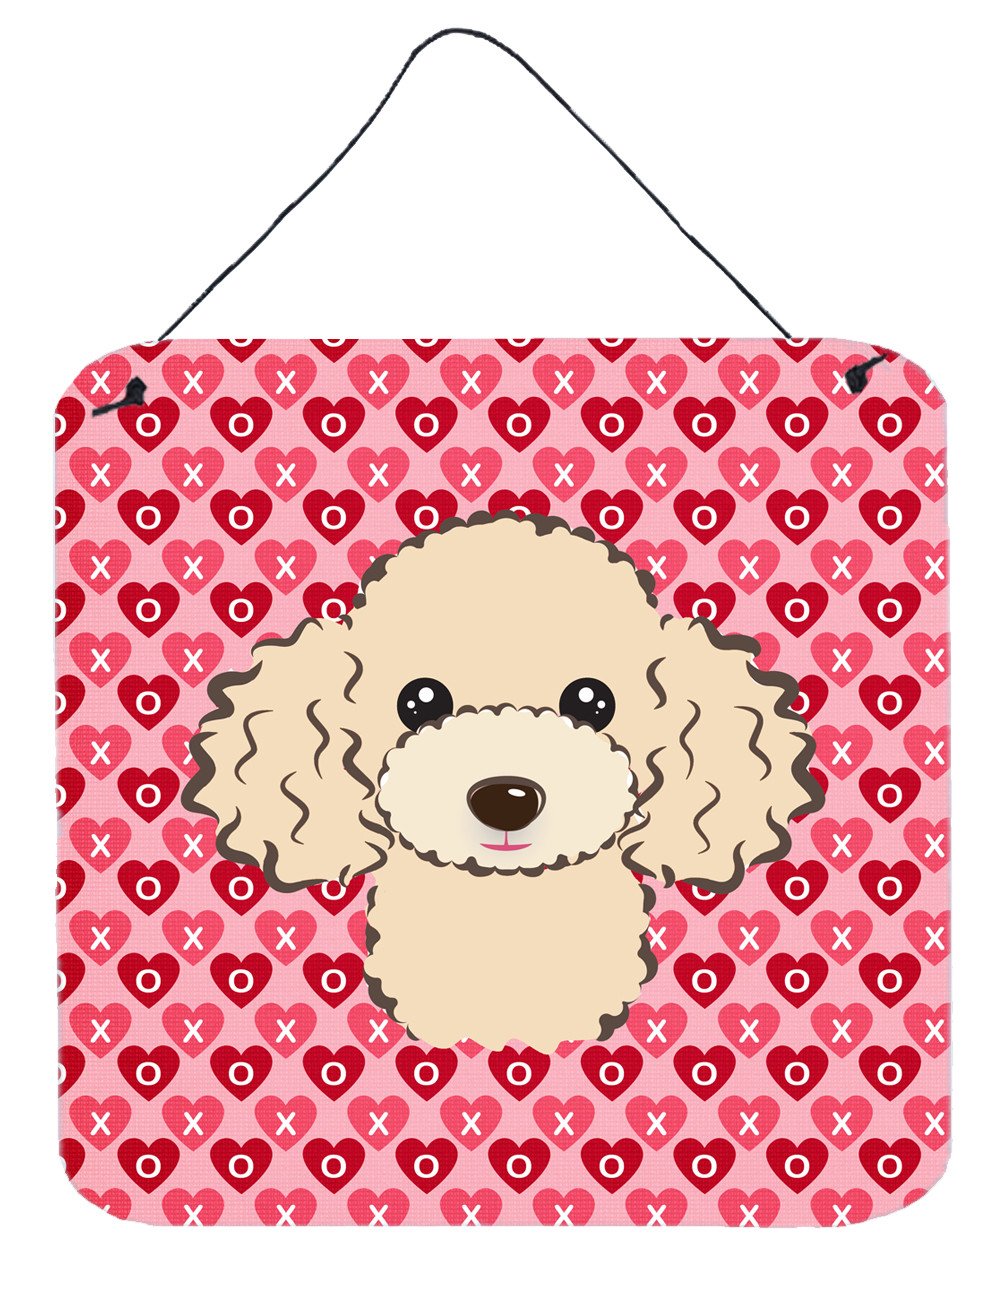 Buff Poodle Hearts Wall or Door Hanging Prints BB5328DS66 by Caroline's Treasures